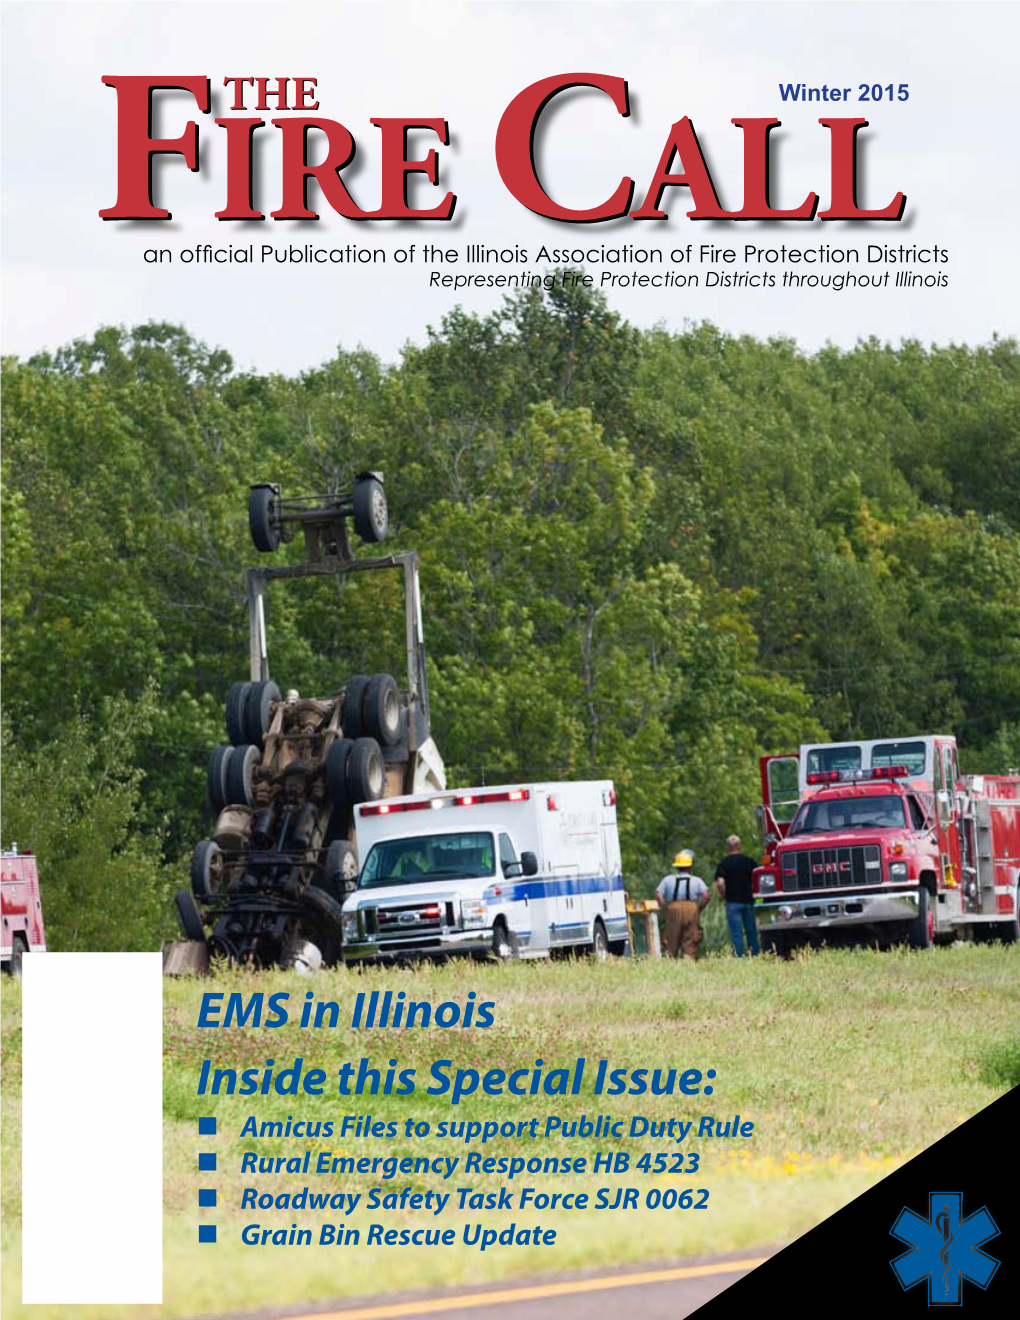 EMS in Illinois Inside This Special Issue